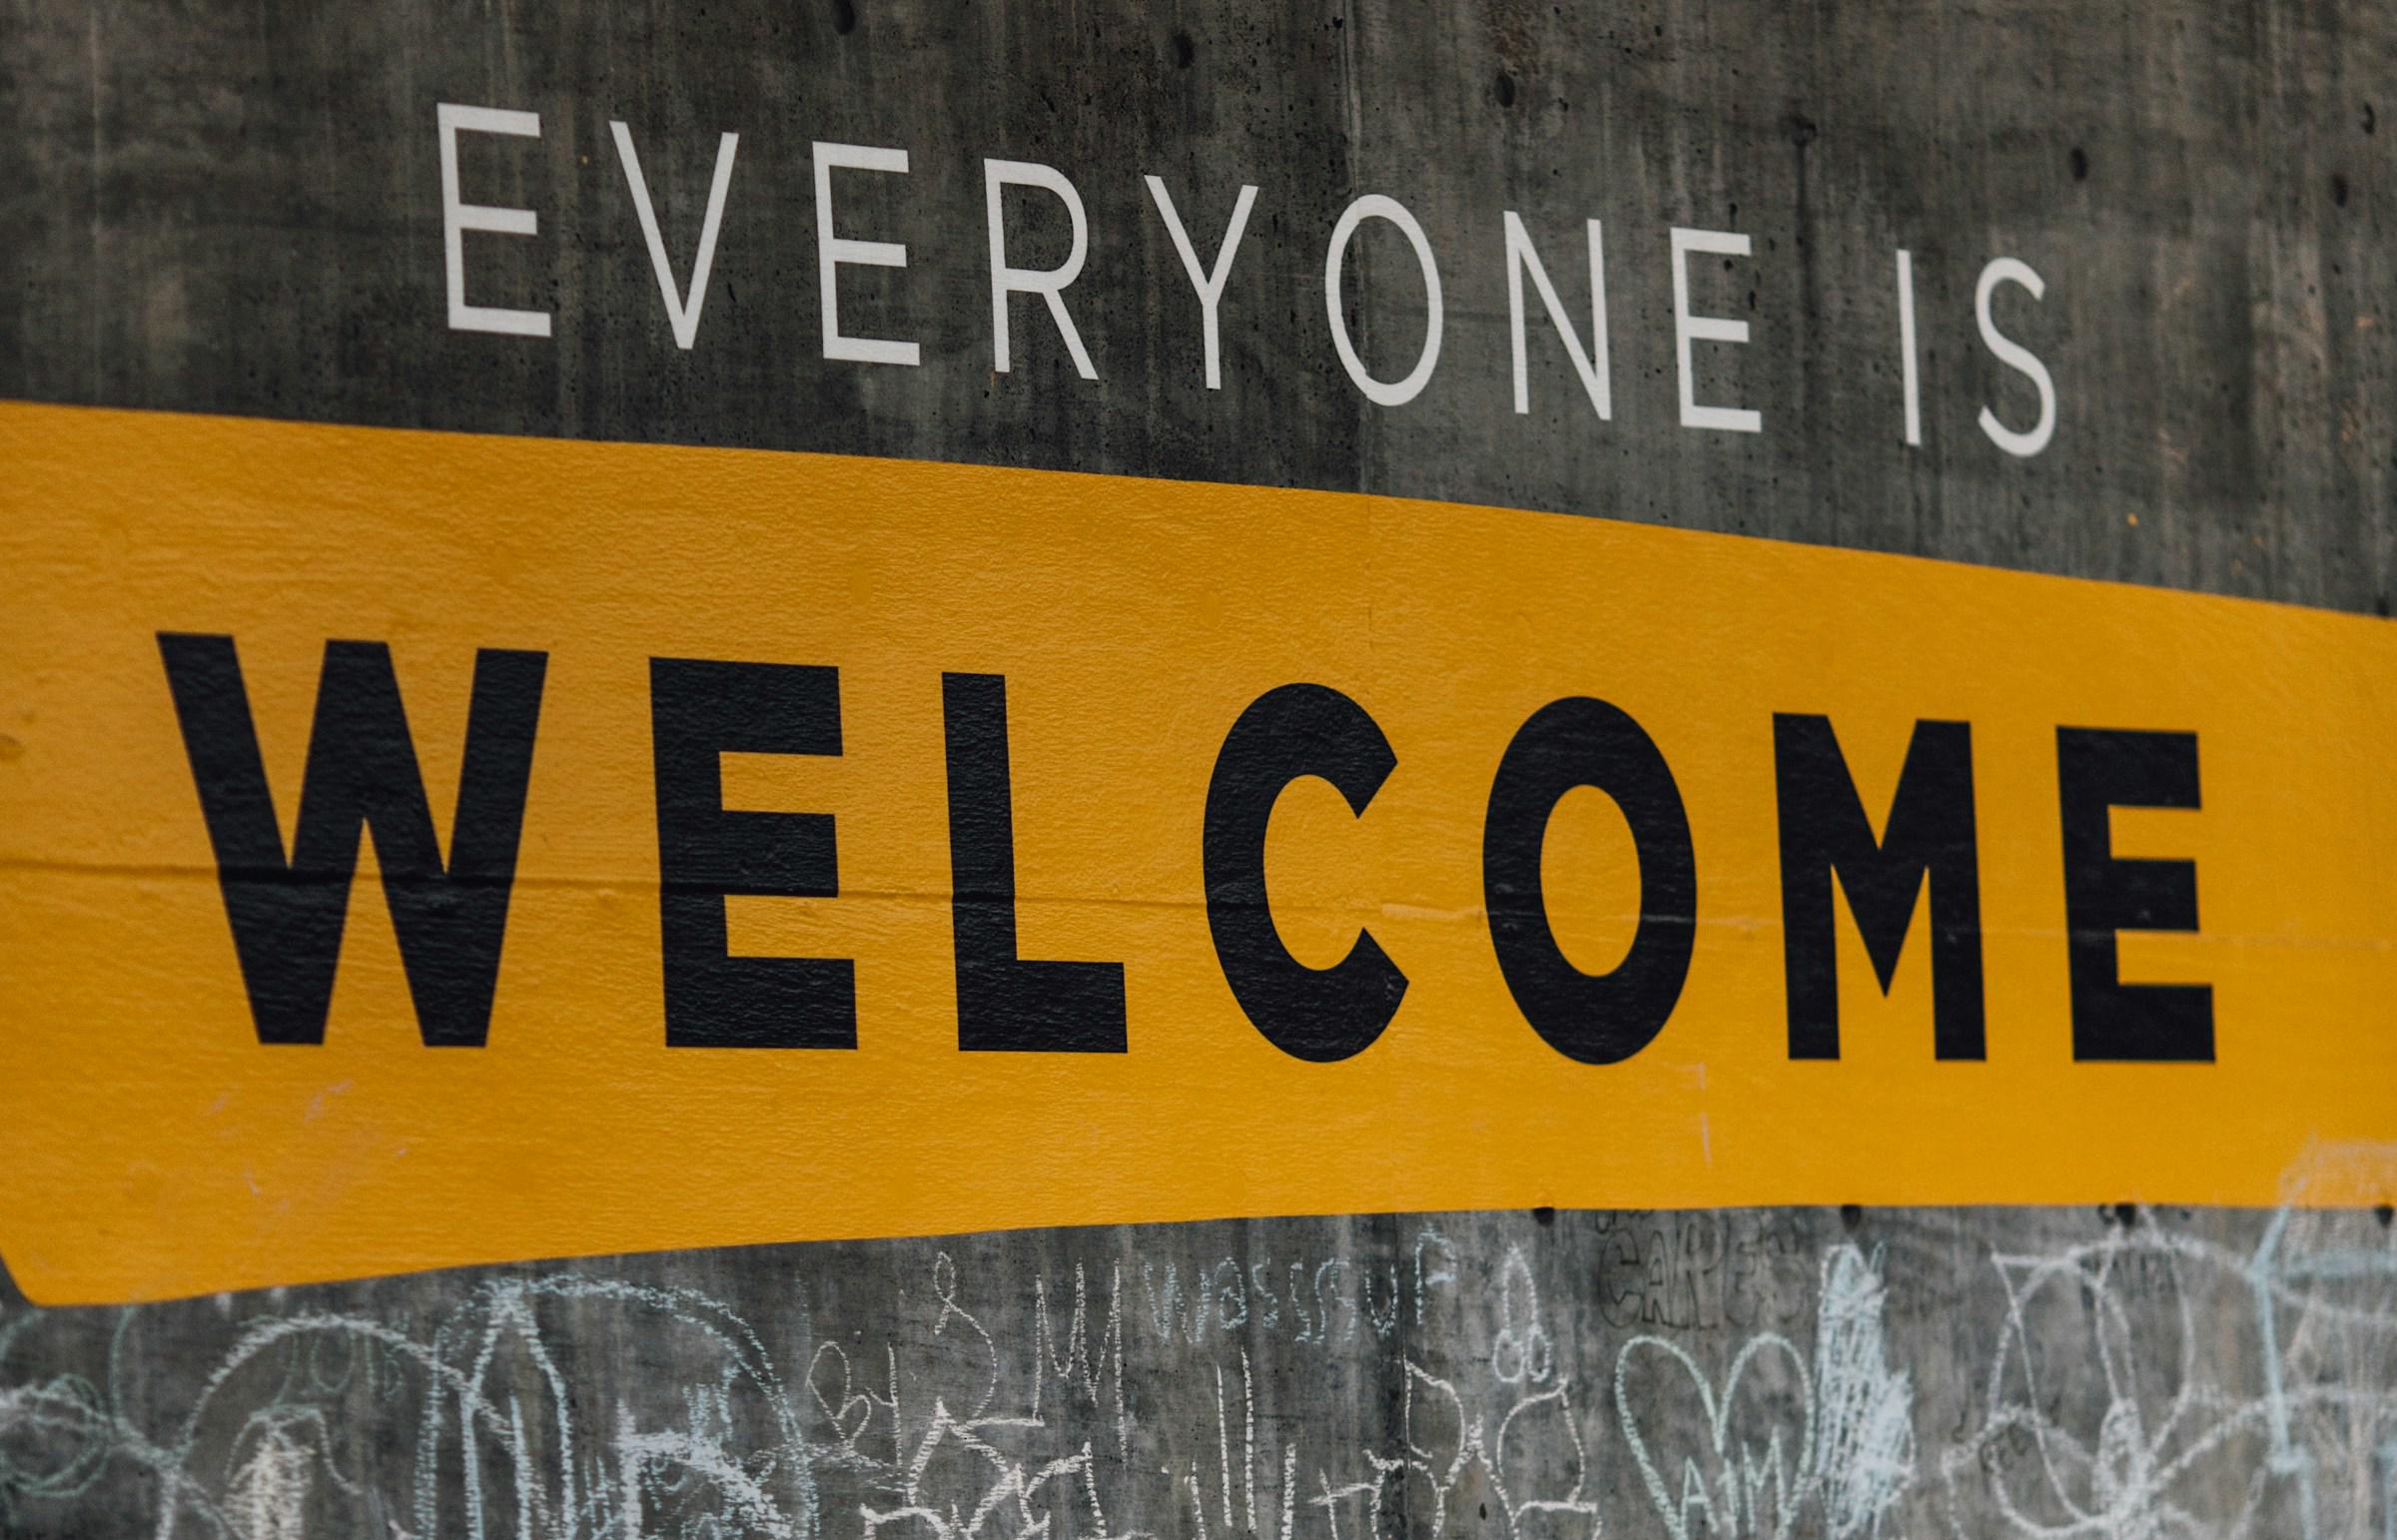 Sign painted on wall, which says: 'Everyone is welcome'